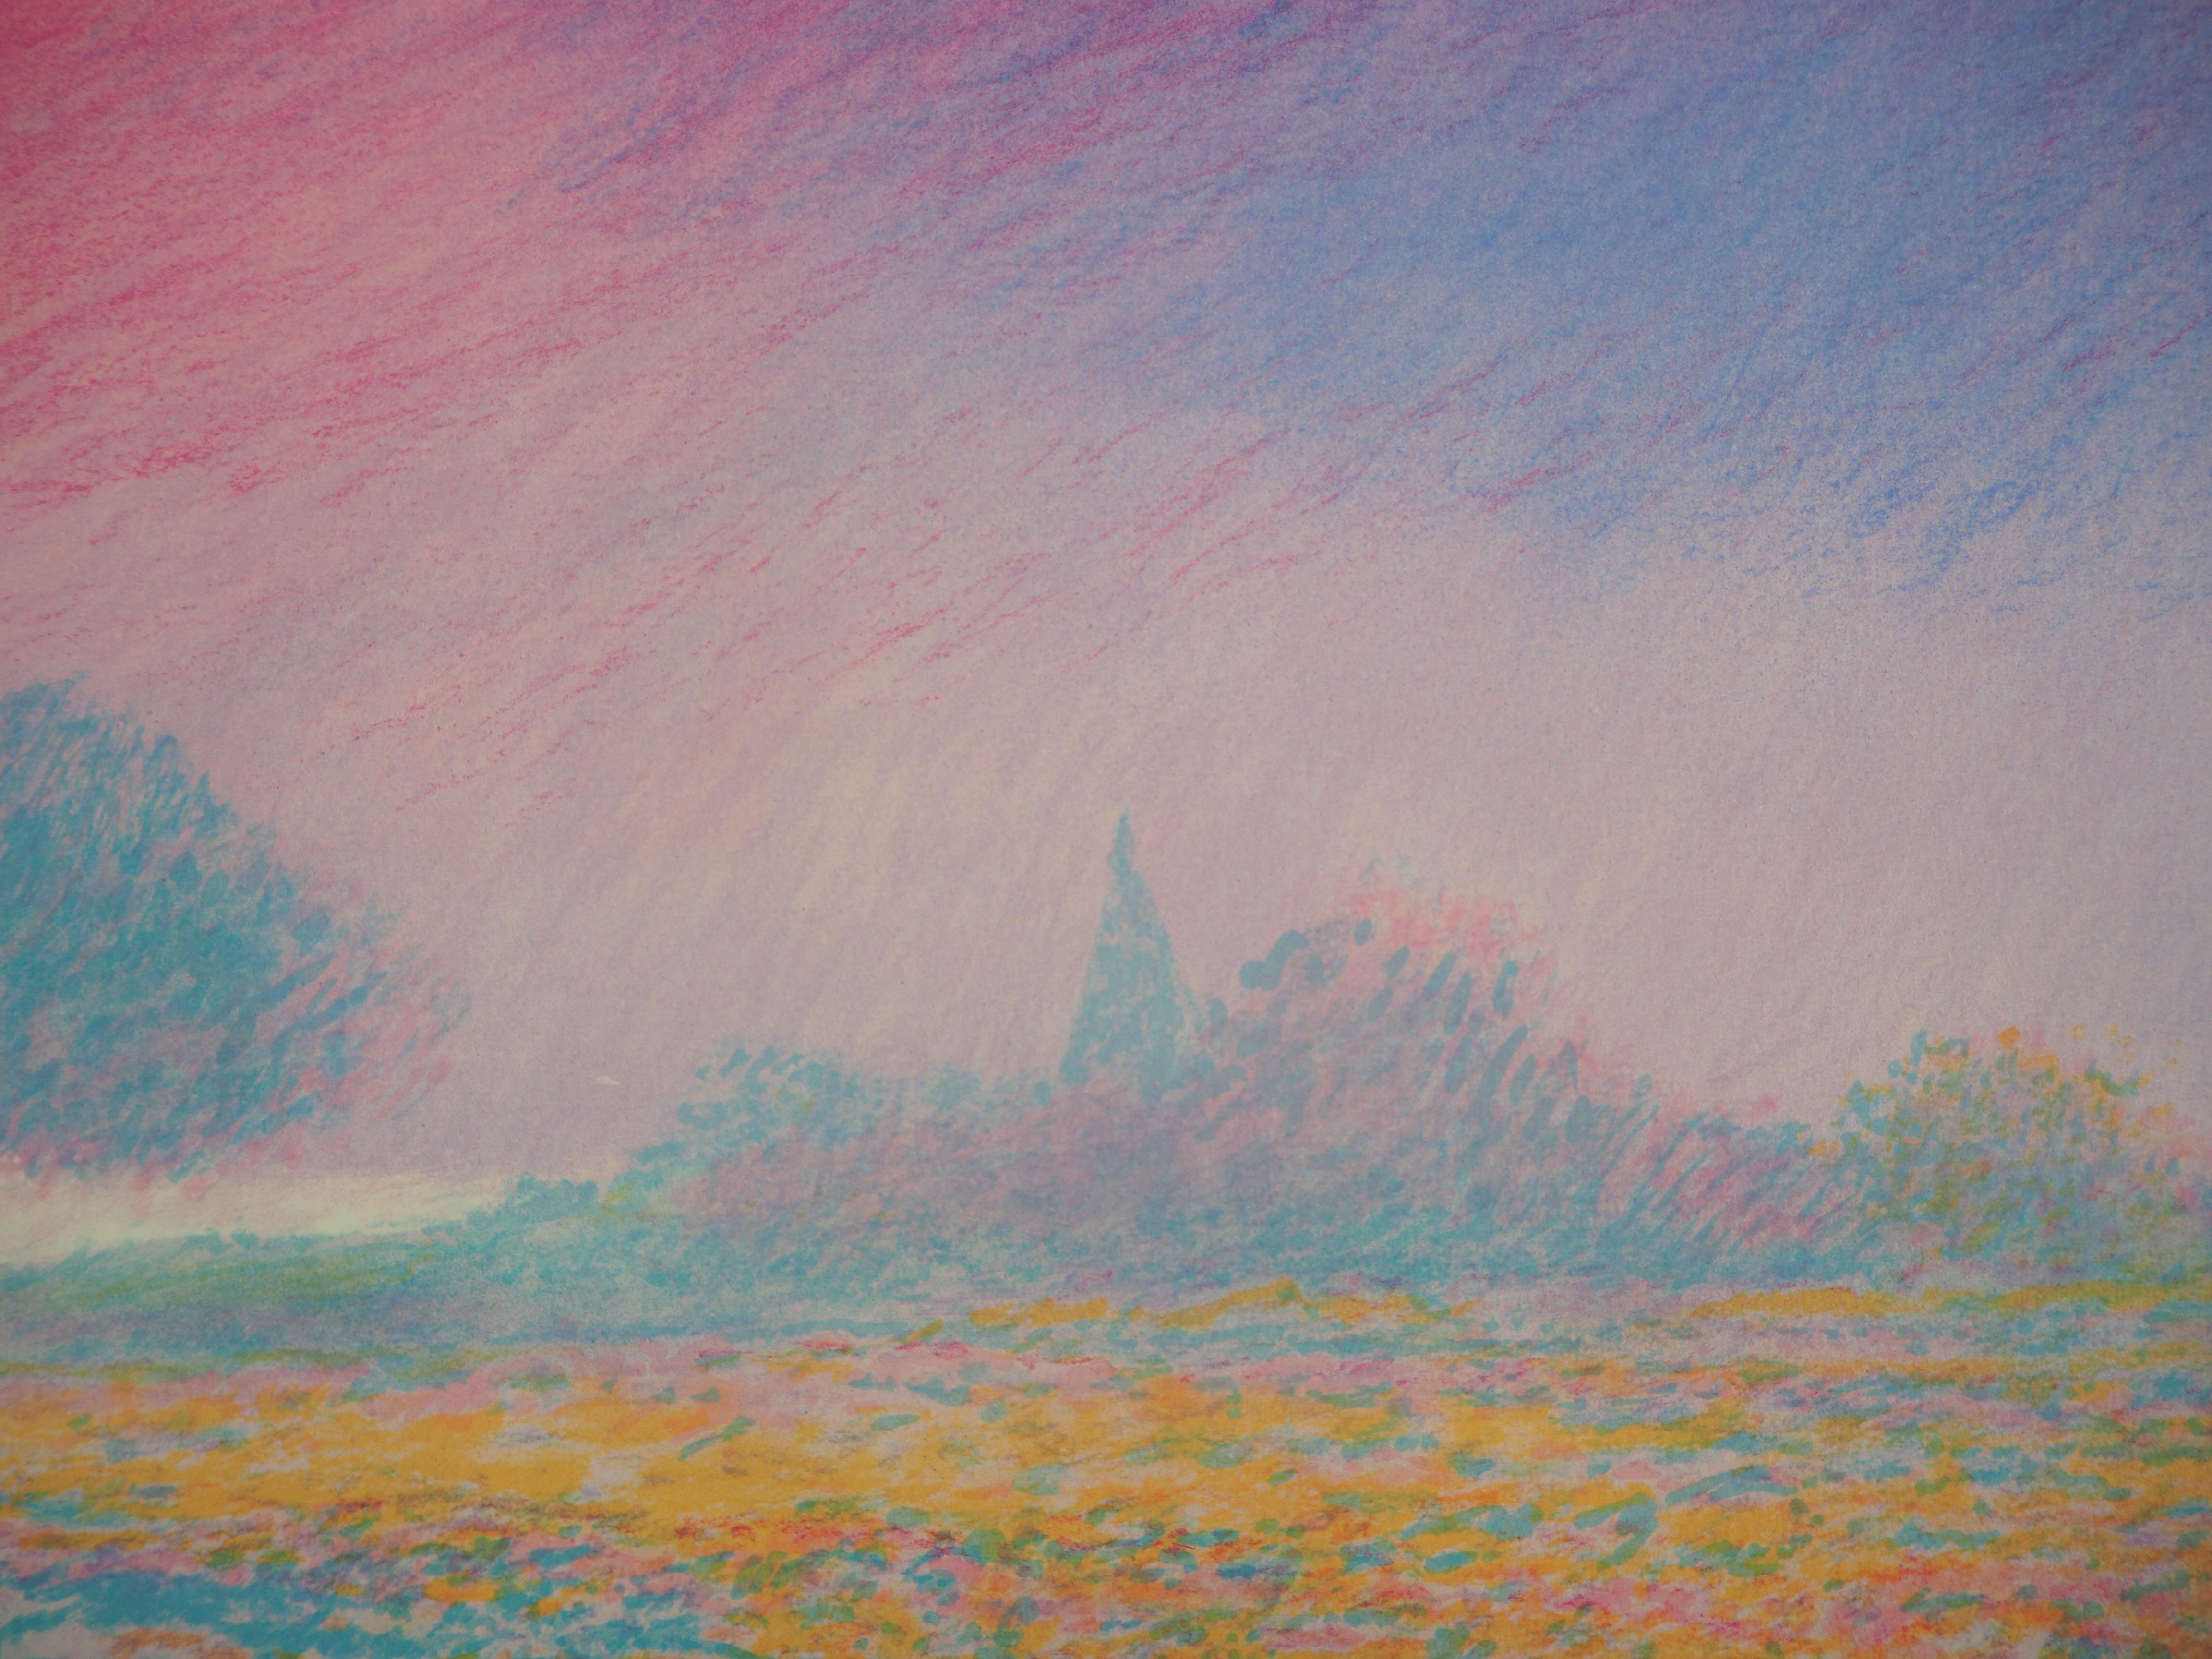 Normandy : A Colorful Spring Day - Original lithograph - Gray Landscape Print by Claude Manoukian